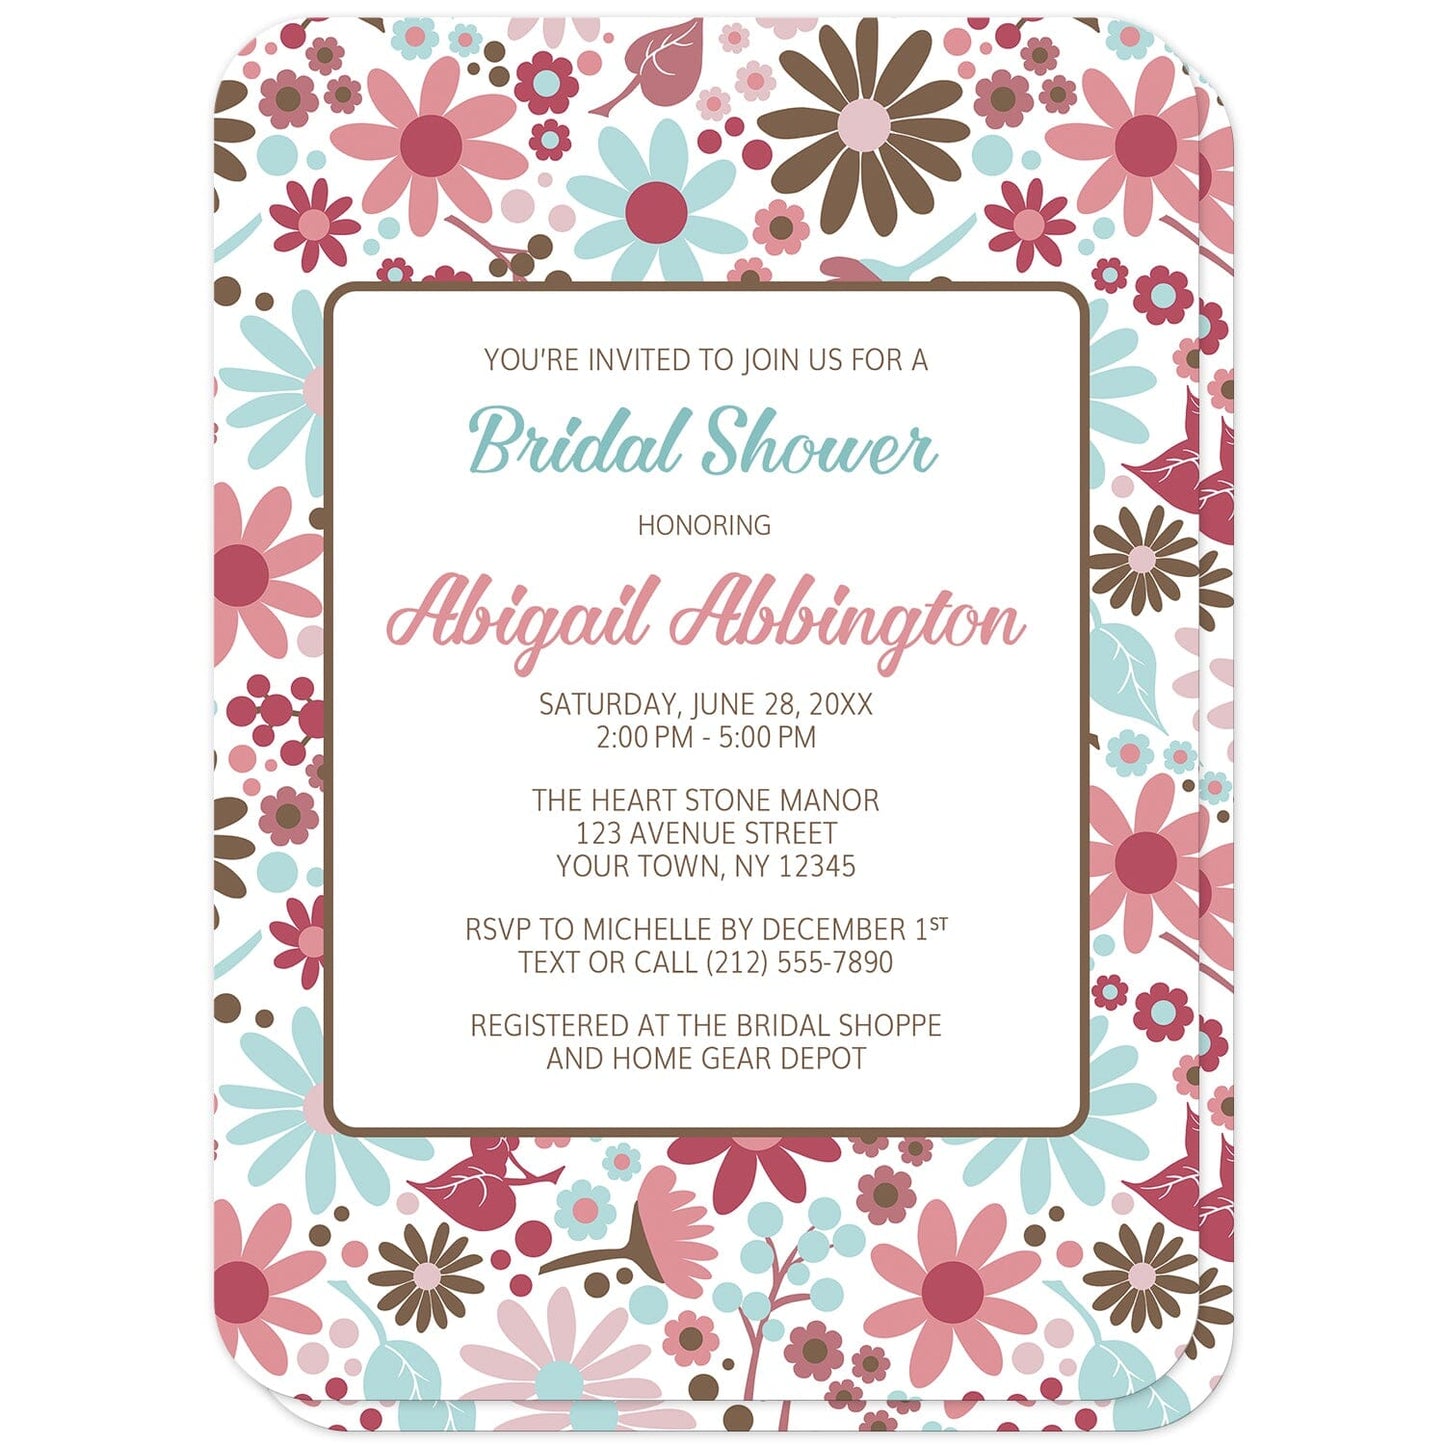 Berry Blue Summer Flowers Bridal Shower Invitations (with rounded corners) at Artistically Invited. Beautiful berry blue summer flowers bridal shower invitations designed with a pretty summer floral pattern in different hues of berry pink with blue and brown. Your personalized bridal shower celebration details are custom printed in blue, pink, and brown on white over the flowers pattern. 